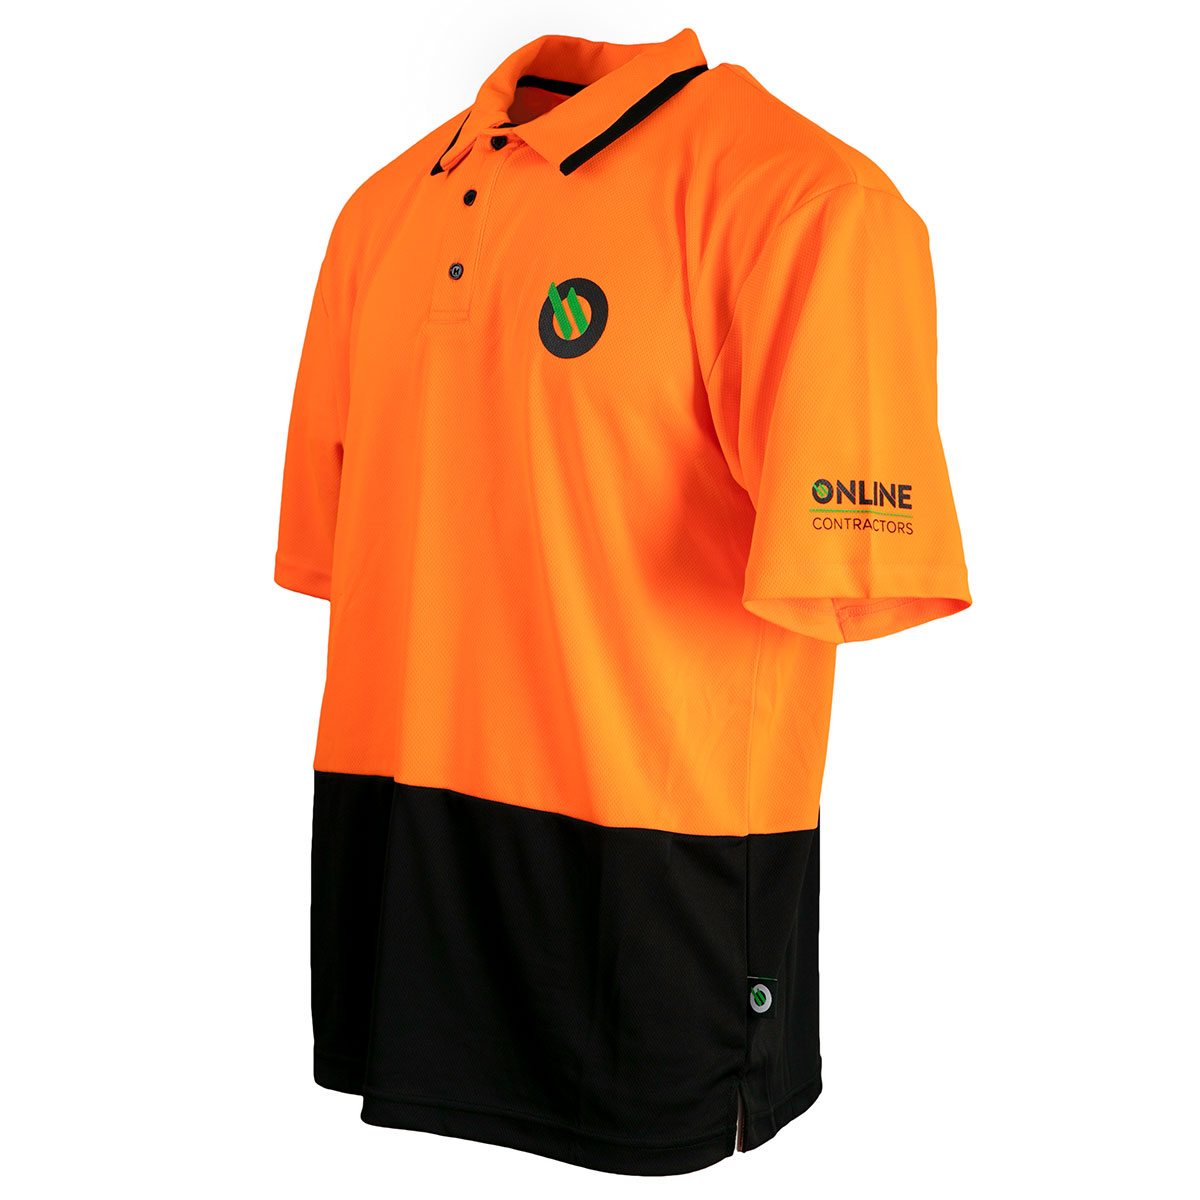 Online Contractors Birdseye Polyester Polo Shirt with Screen Printed Logos